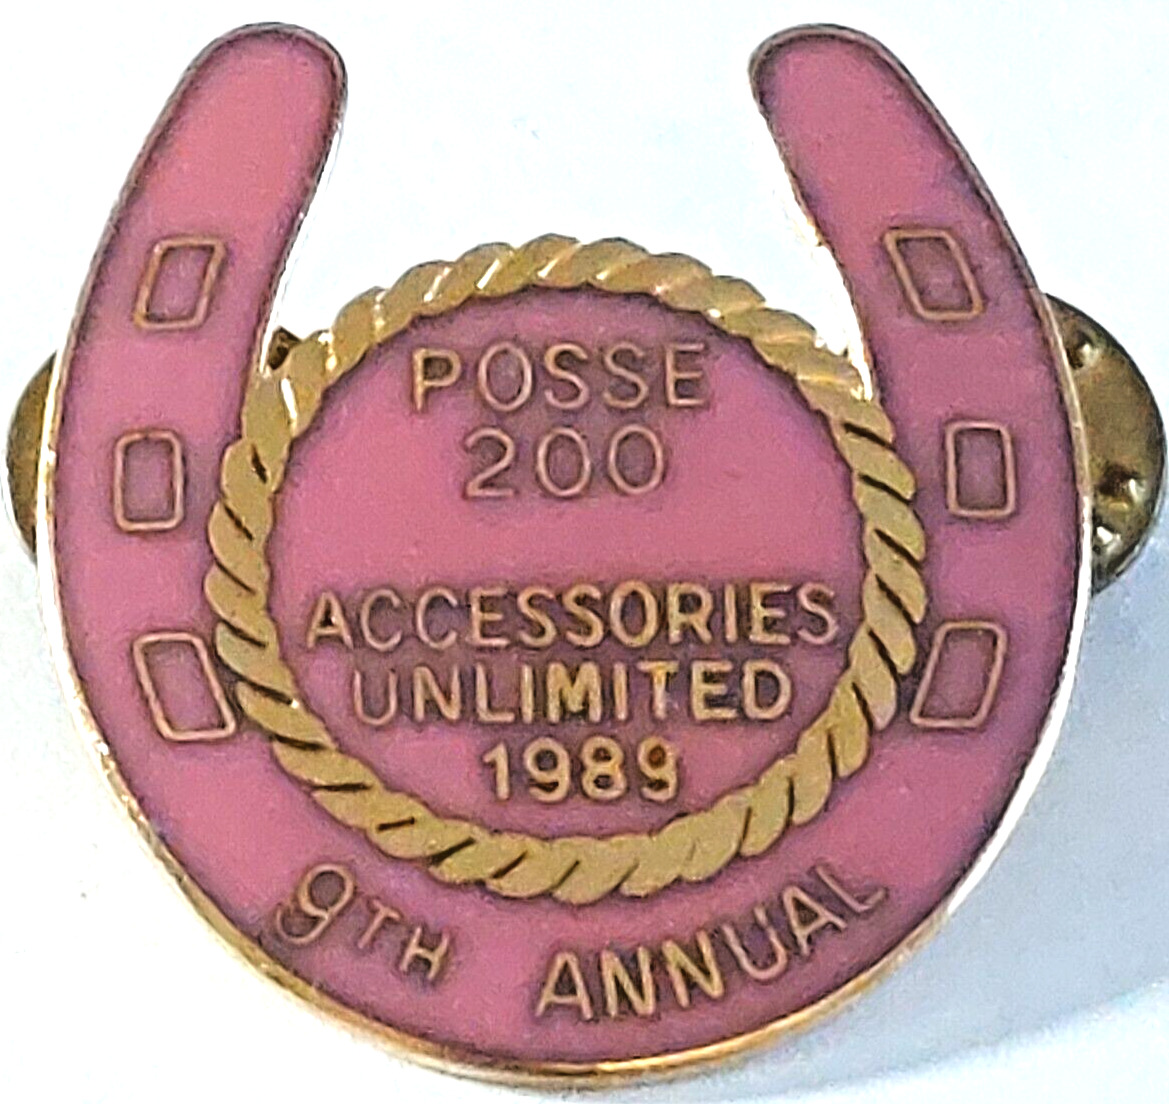 Accessories Unlimited 1989 9th Annual Posse 200 Lapel Pin (090923)